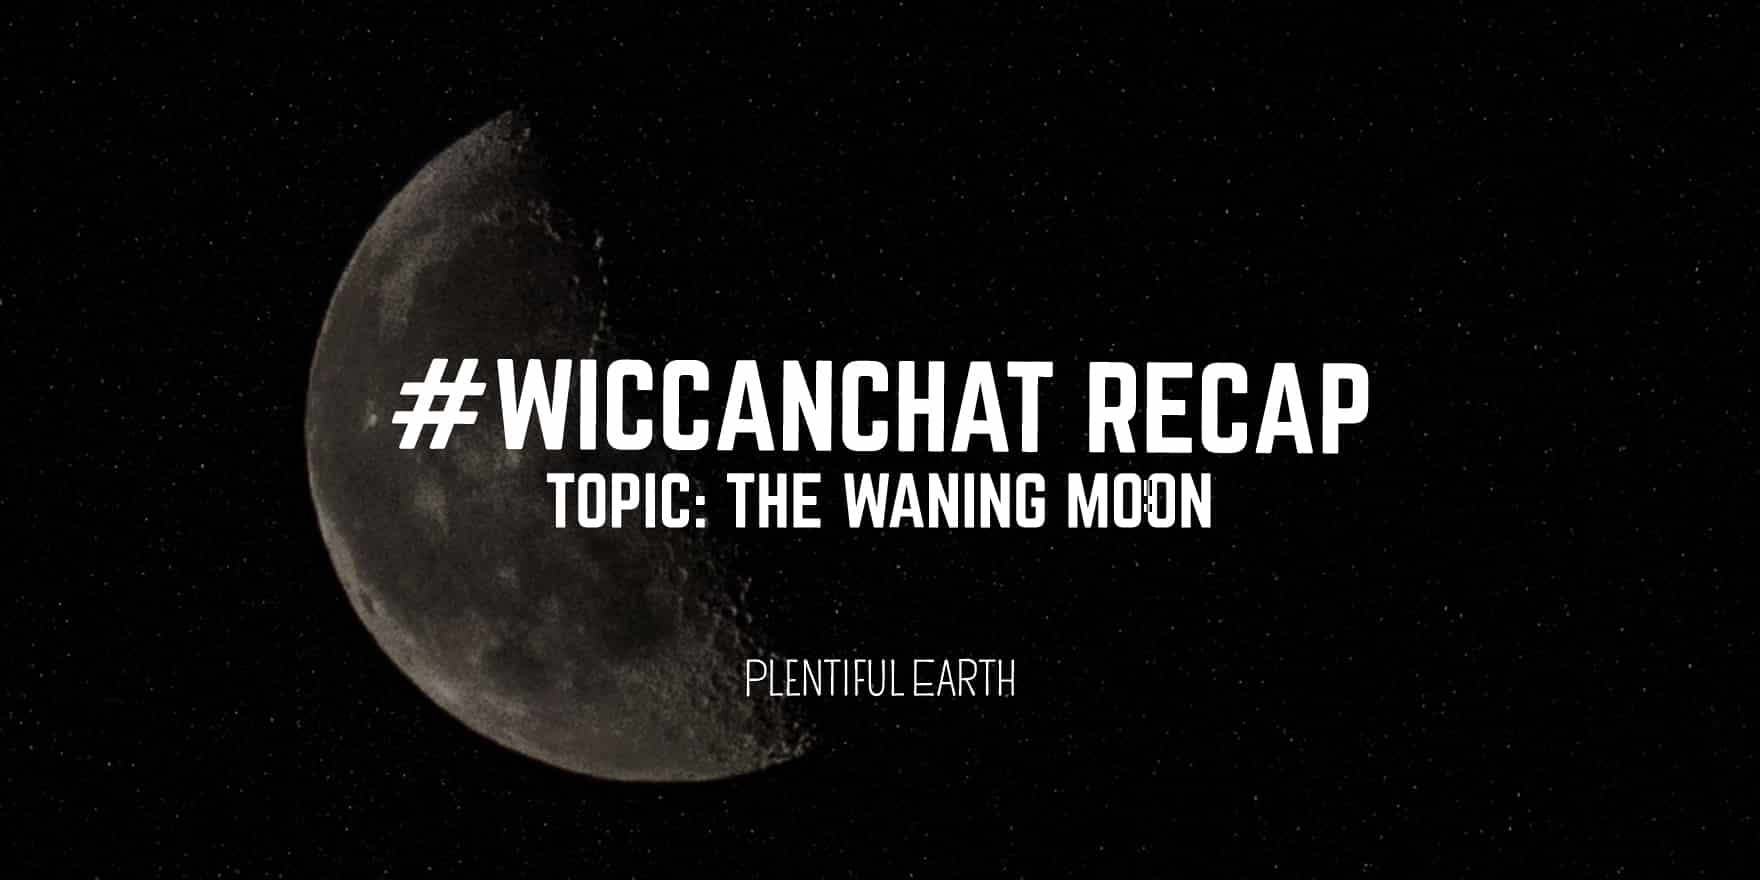 A serene waning moon adorns the night sky, accompanied by the text "#wiccanchat recap, topic: the waning moon - spiritual earth.